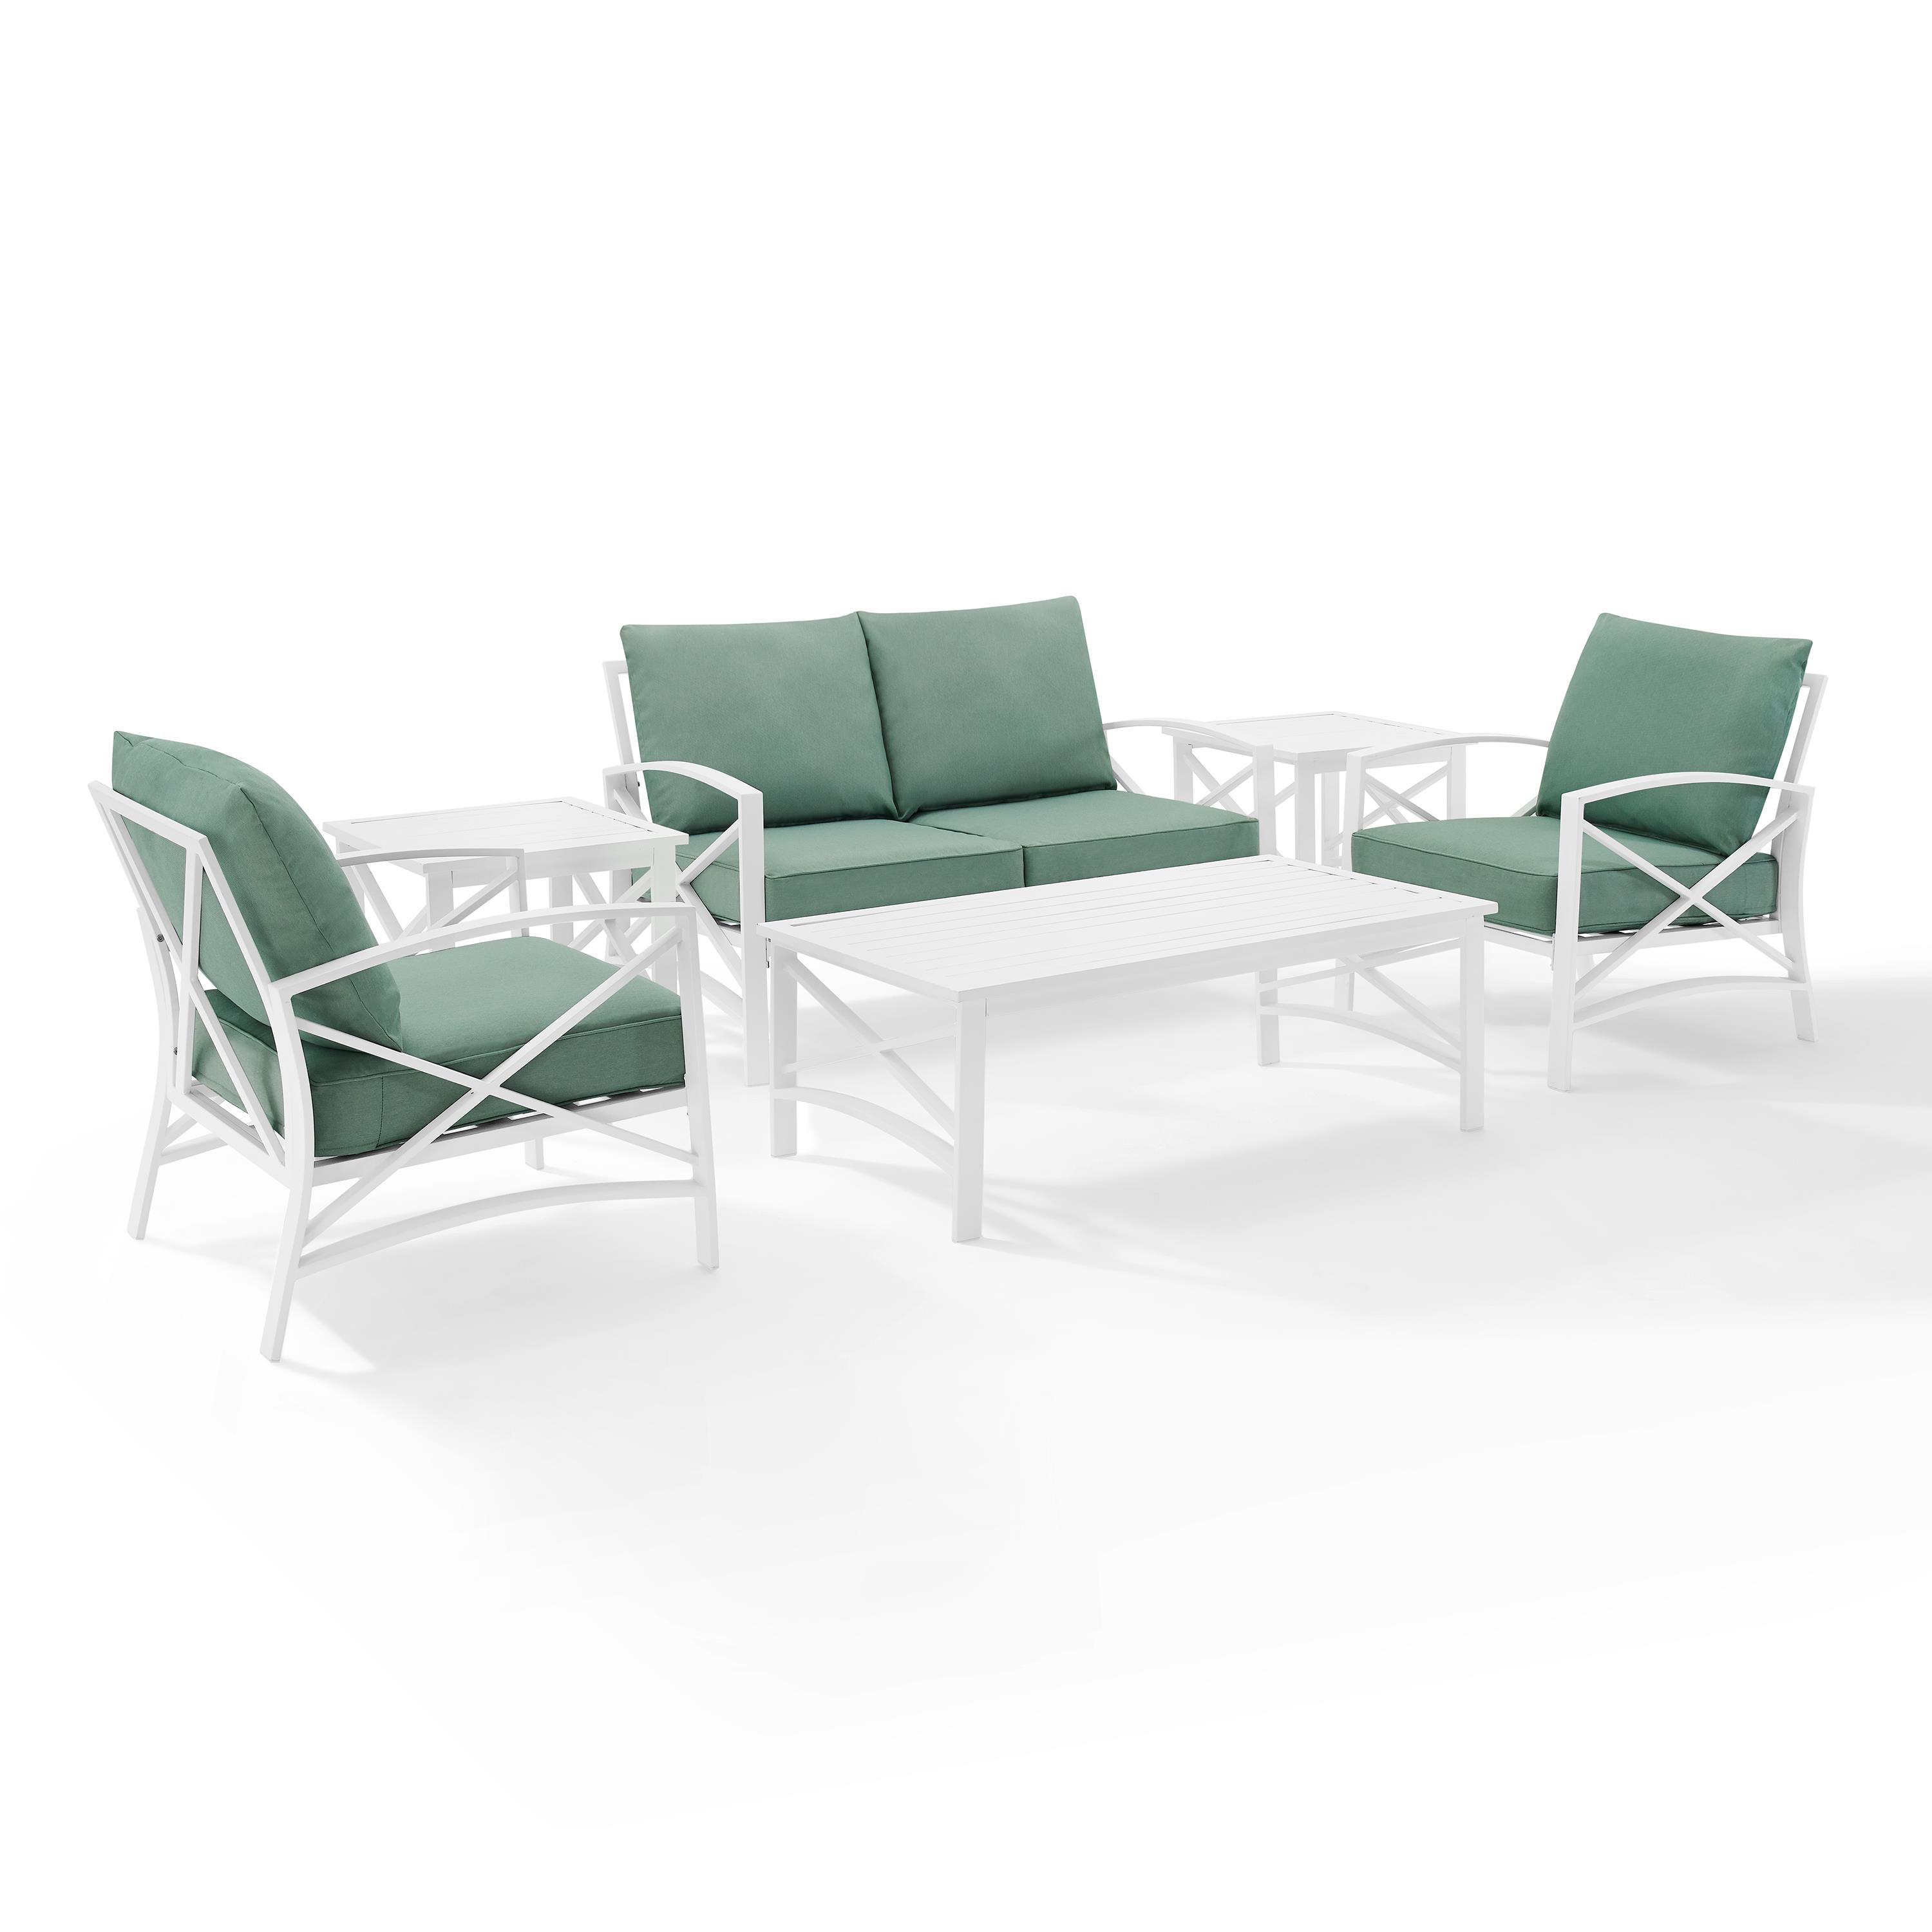 Crosley Kaplan 6Pc Outdoor Conversation Set- Loveseat, 2 Chairs, 2 Side Tables, Coffee Table - image 5 of 6